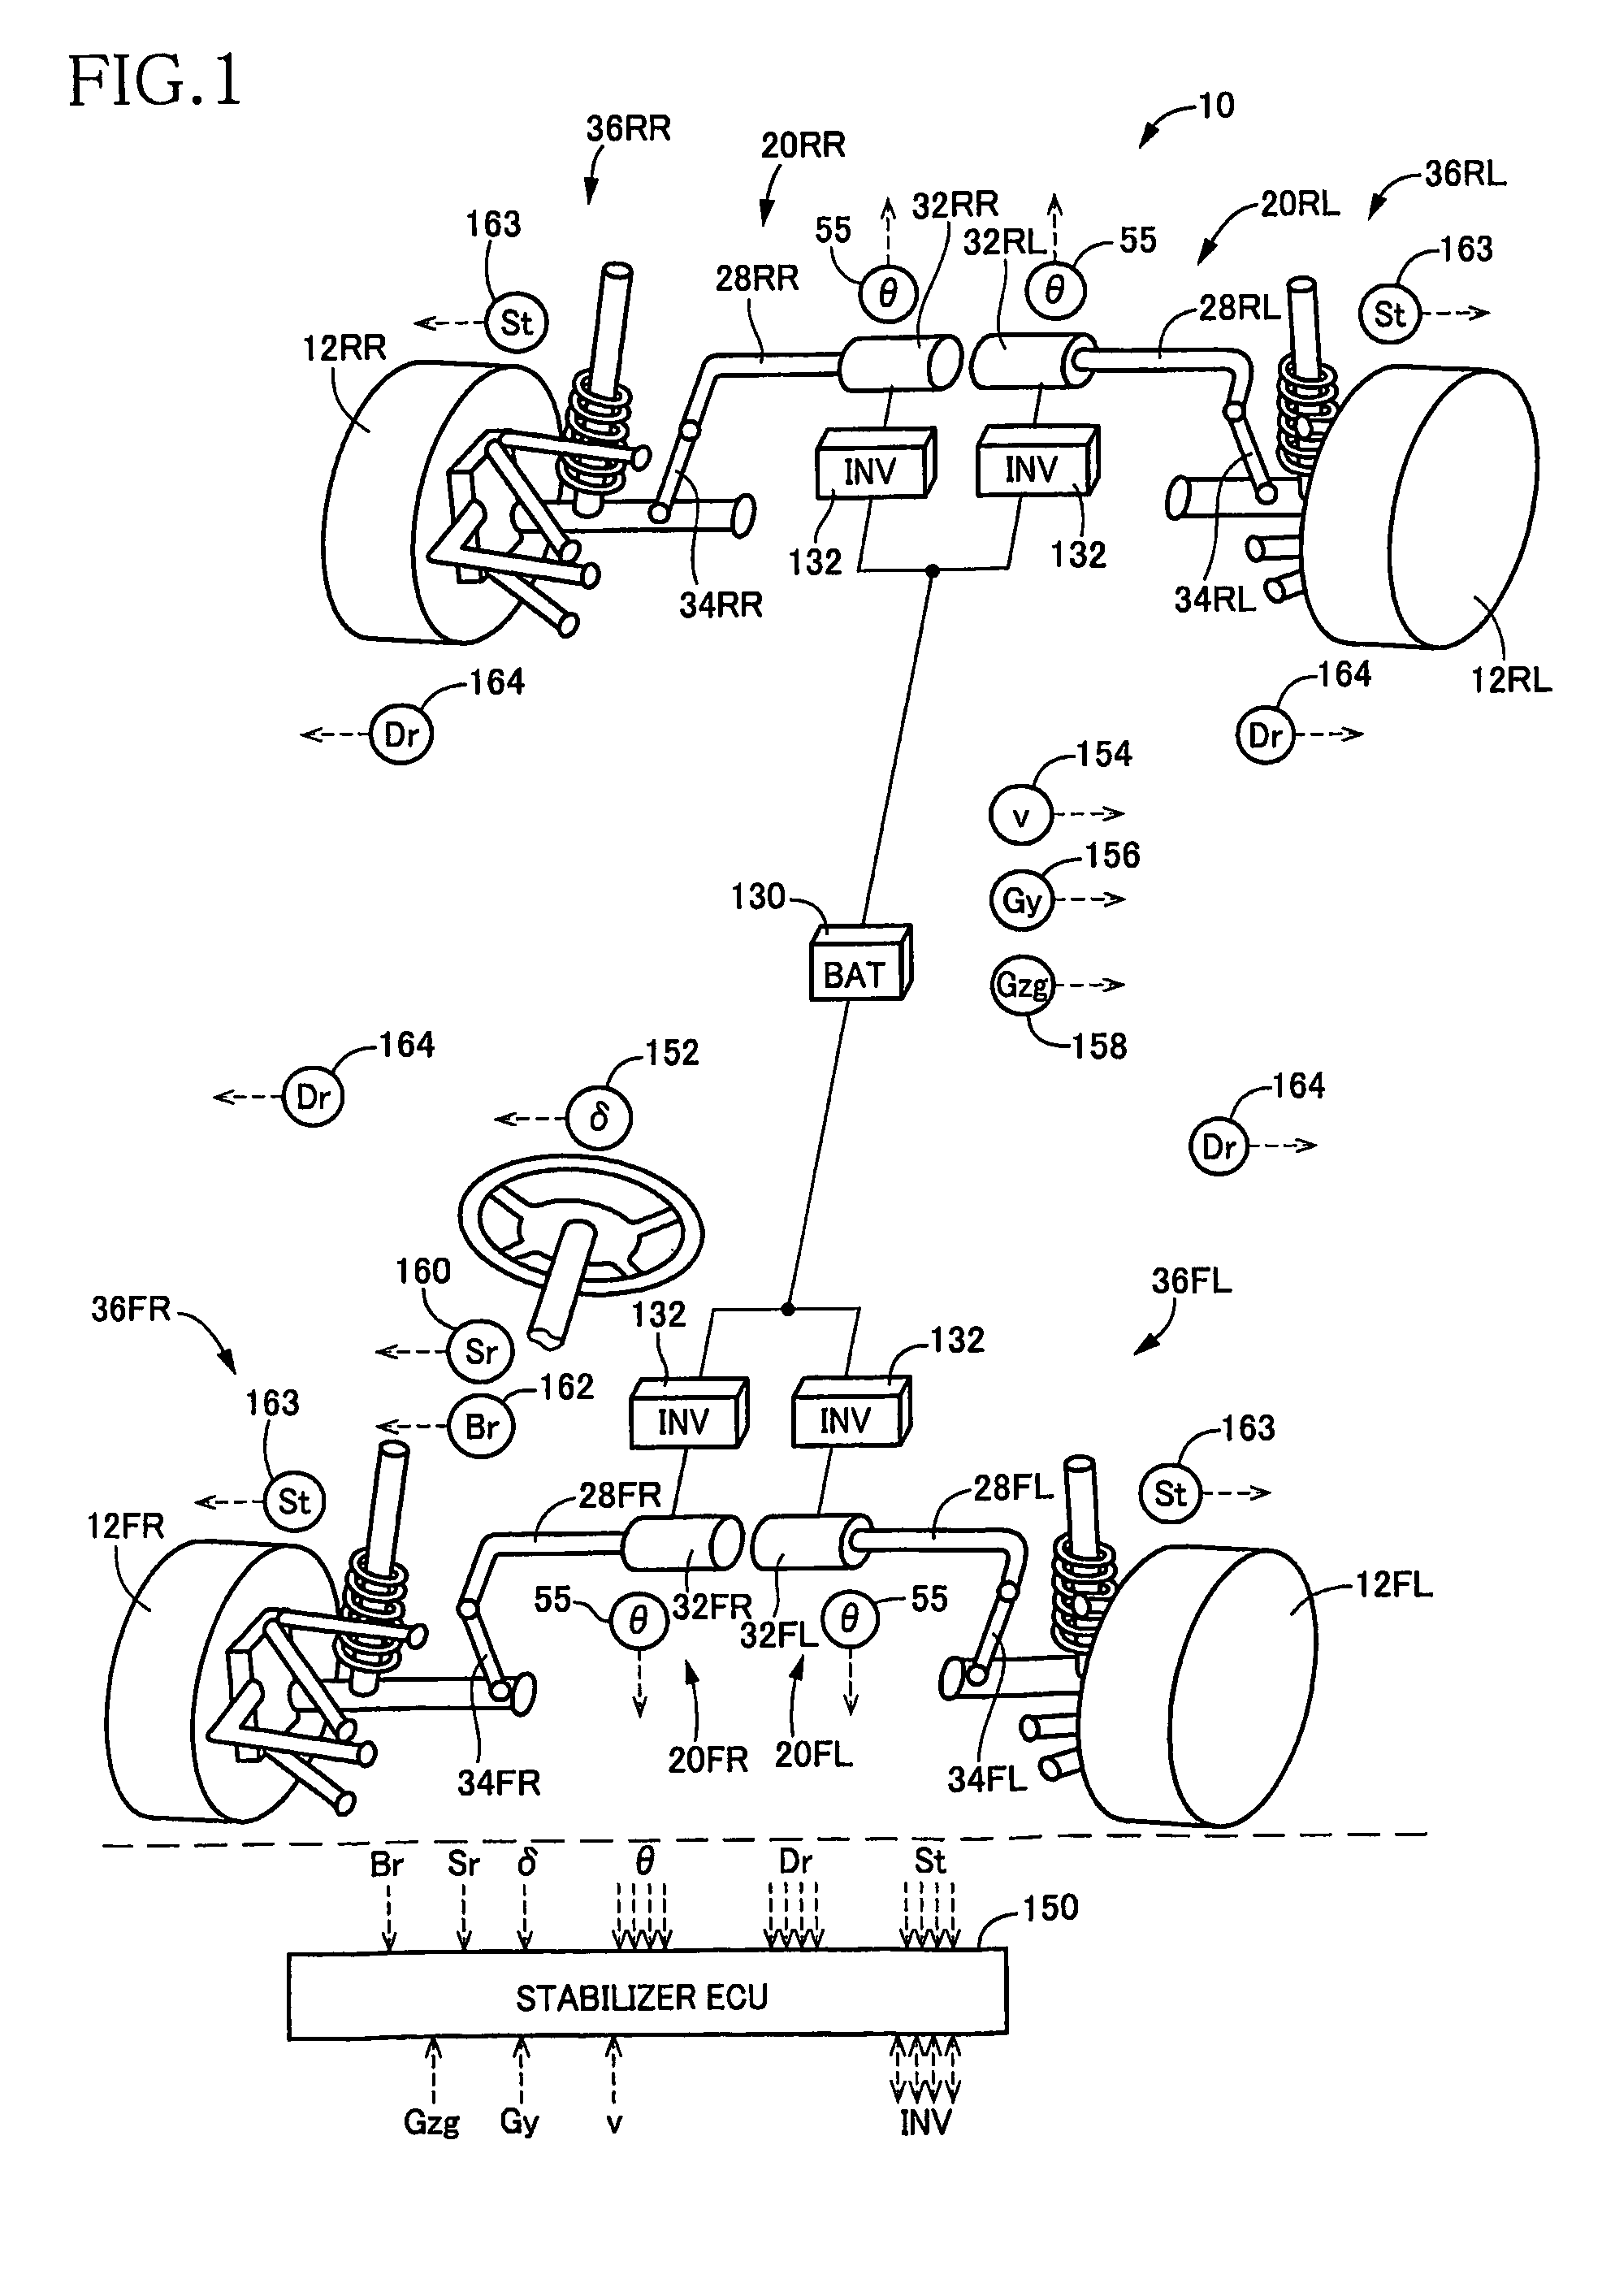 Vehicle stabilizer system